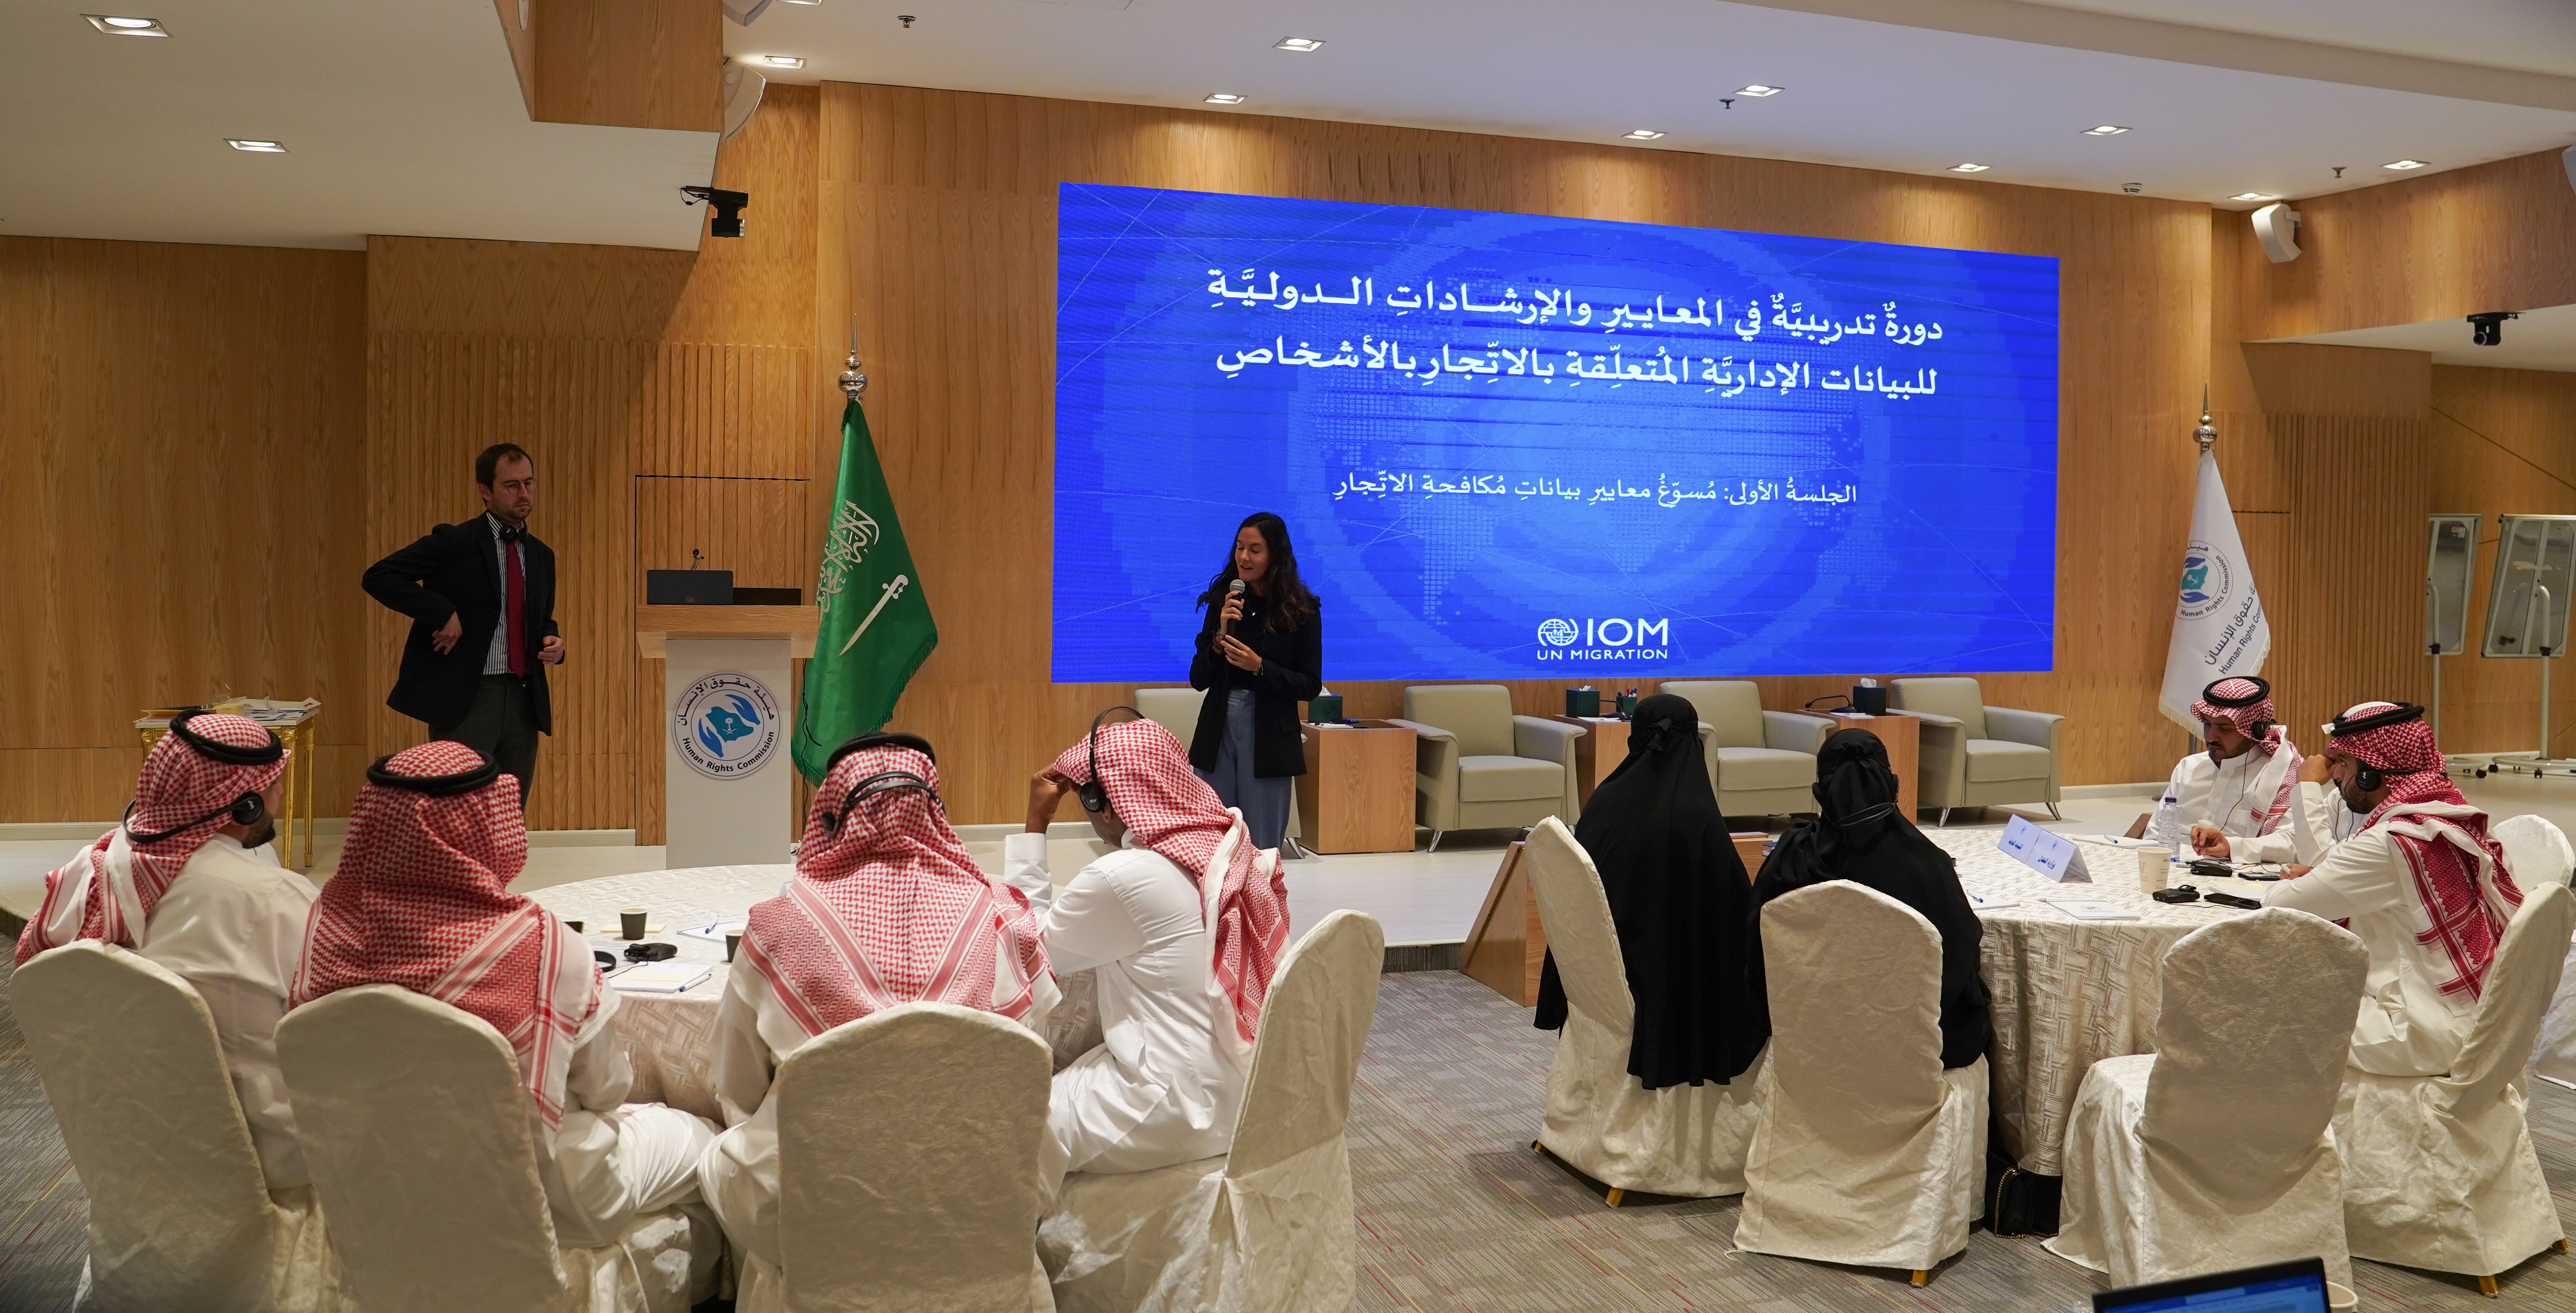 The Anti-Trafficking in Persons Committee organized a workshop on administrative data related to human trafficking